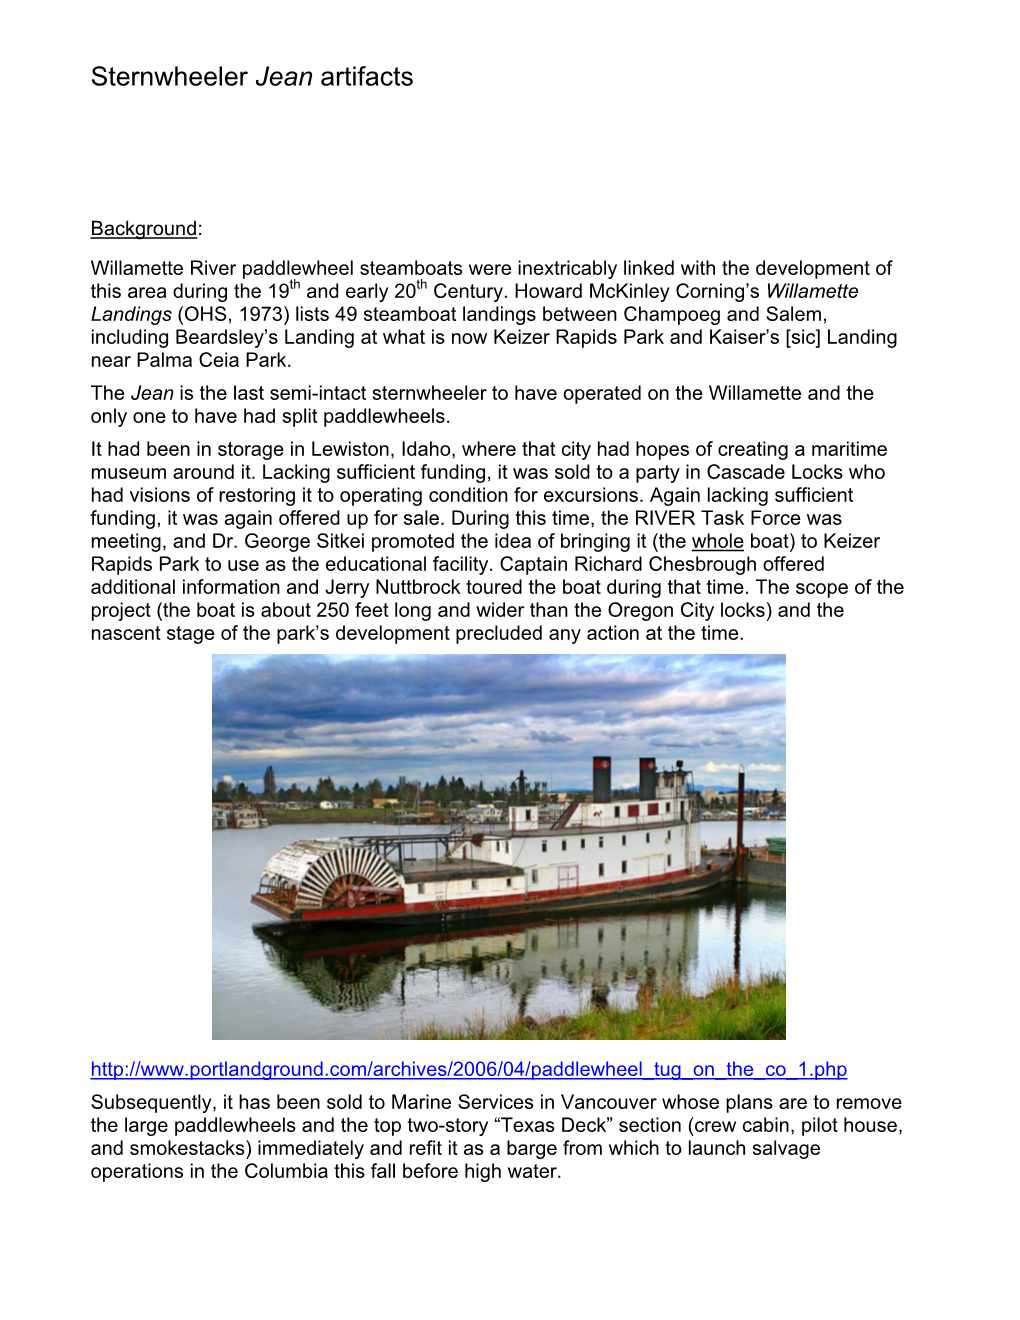 Opportunity to Get Artifacts from the Willamette Sternwheeler Jean